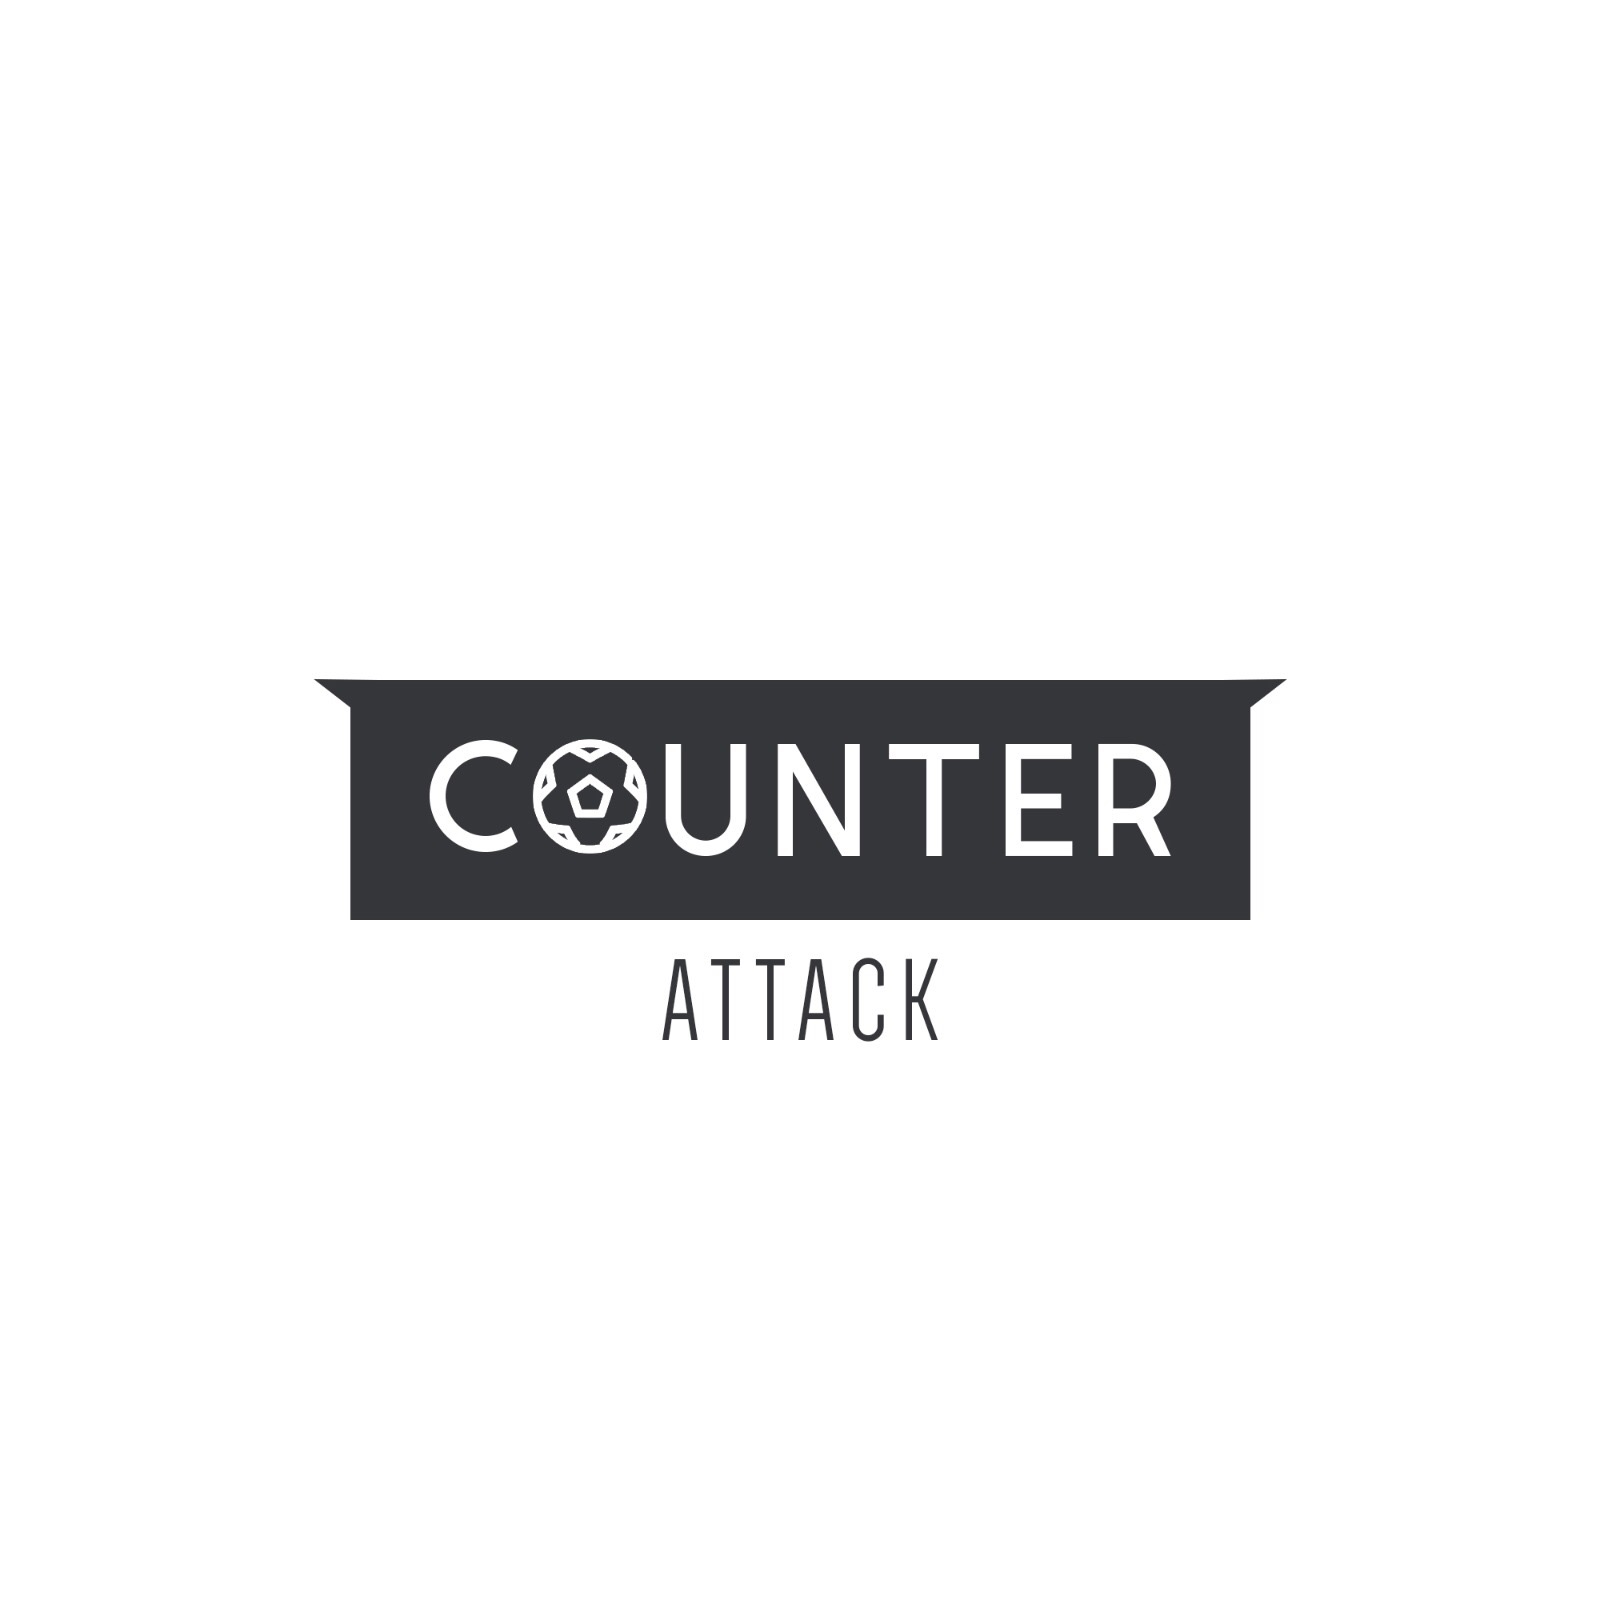 Counter Attack - Episode 86 - Should Liverpool Focus On The League?